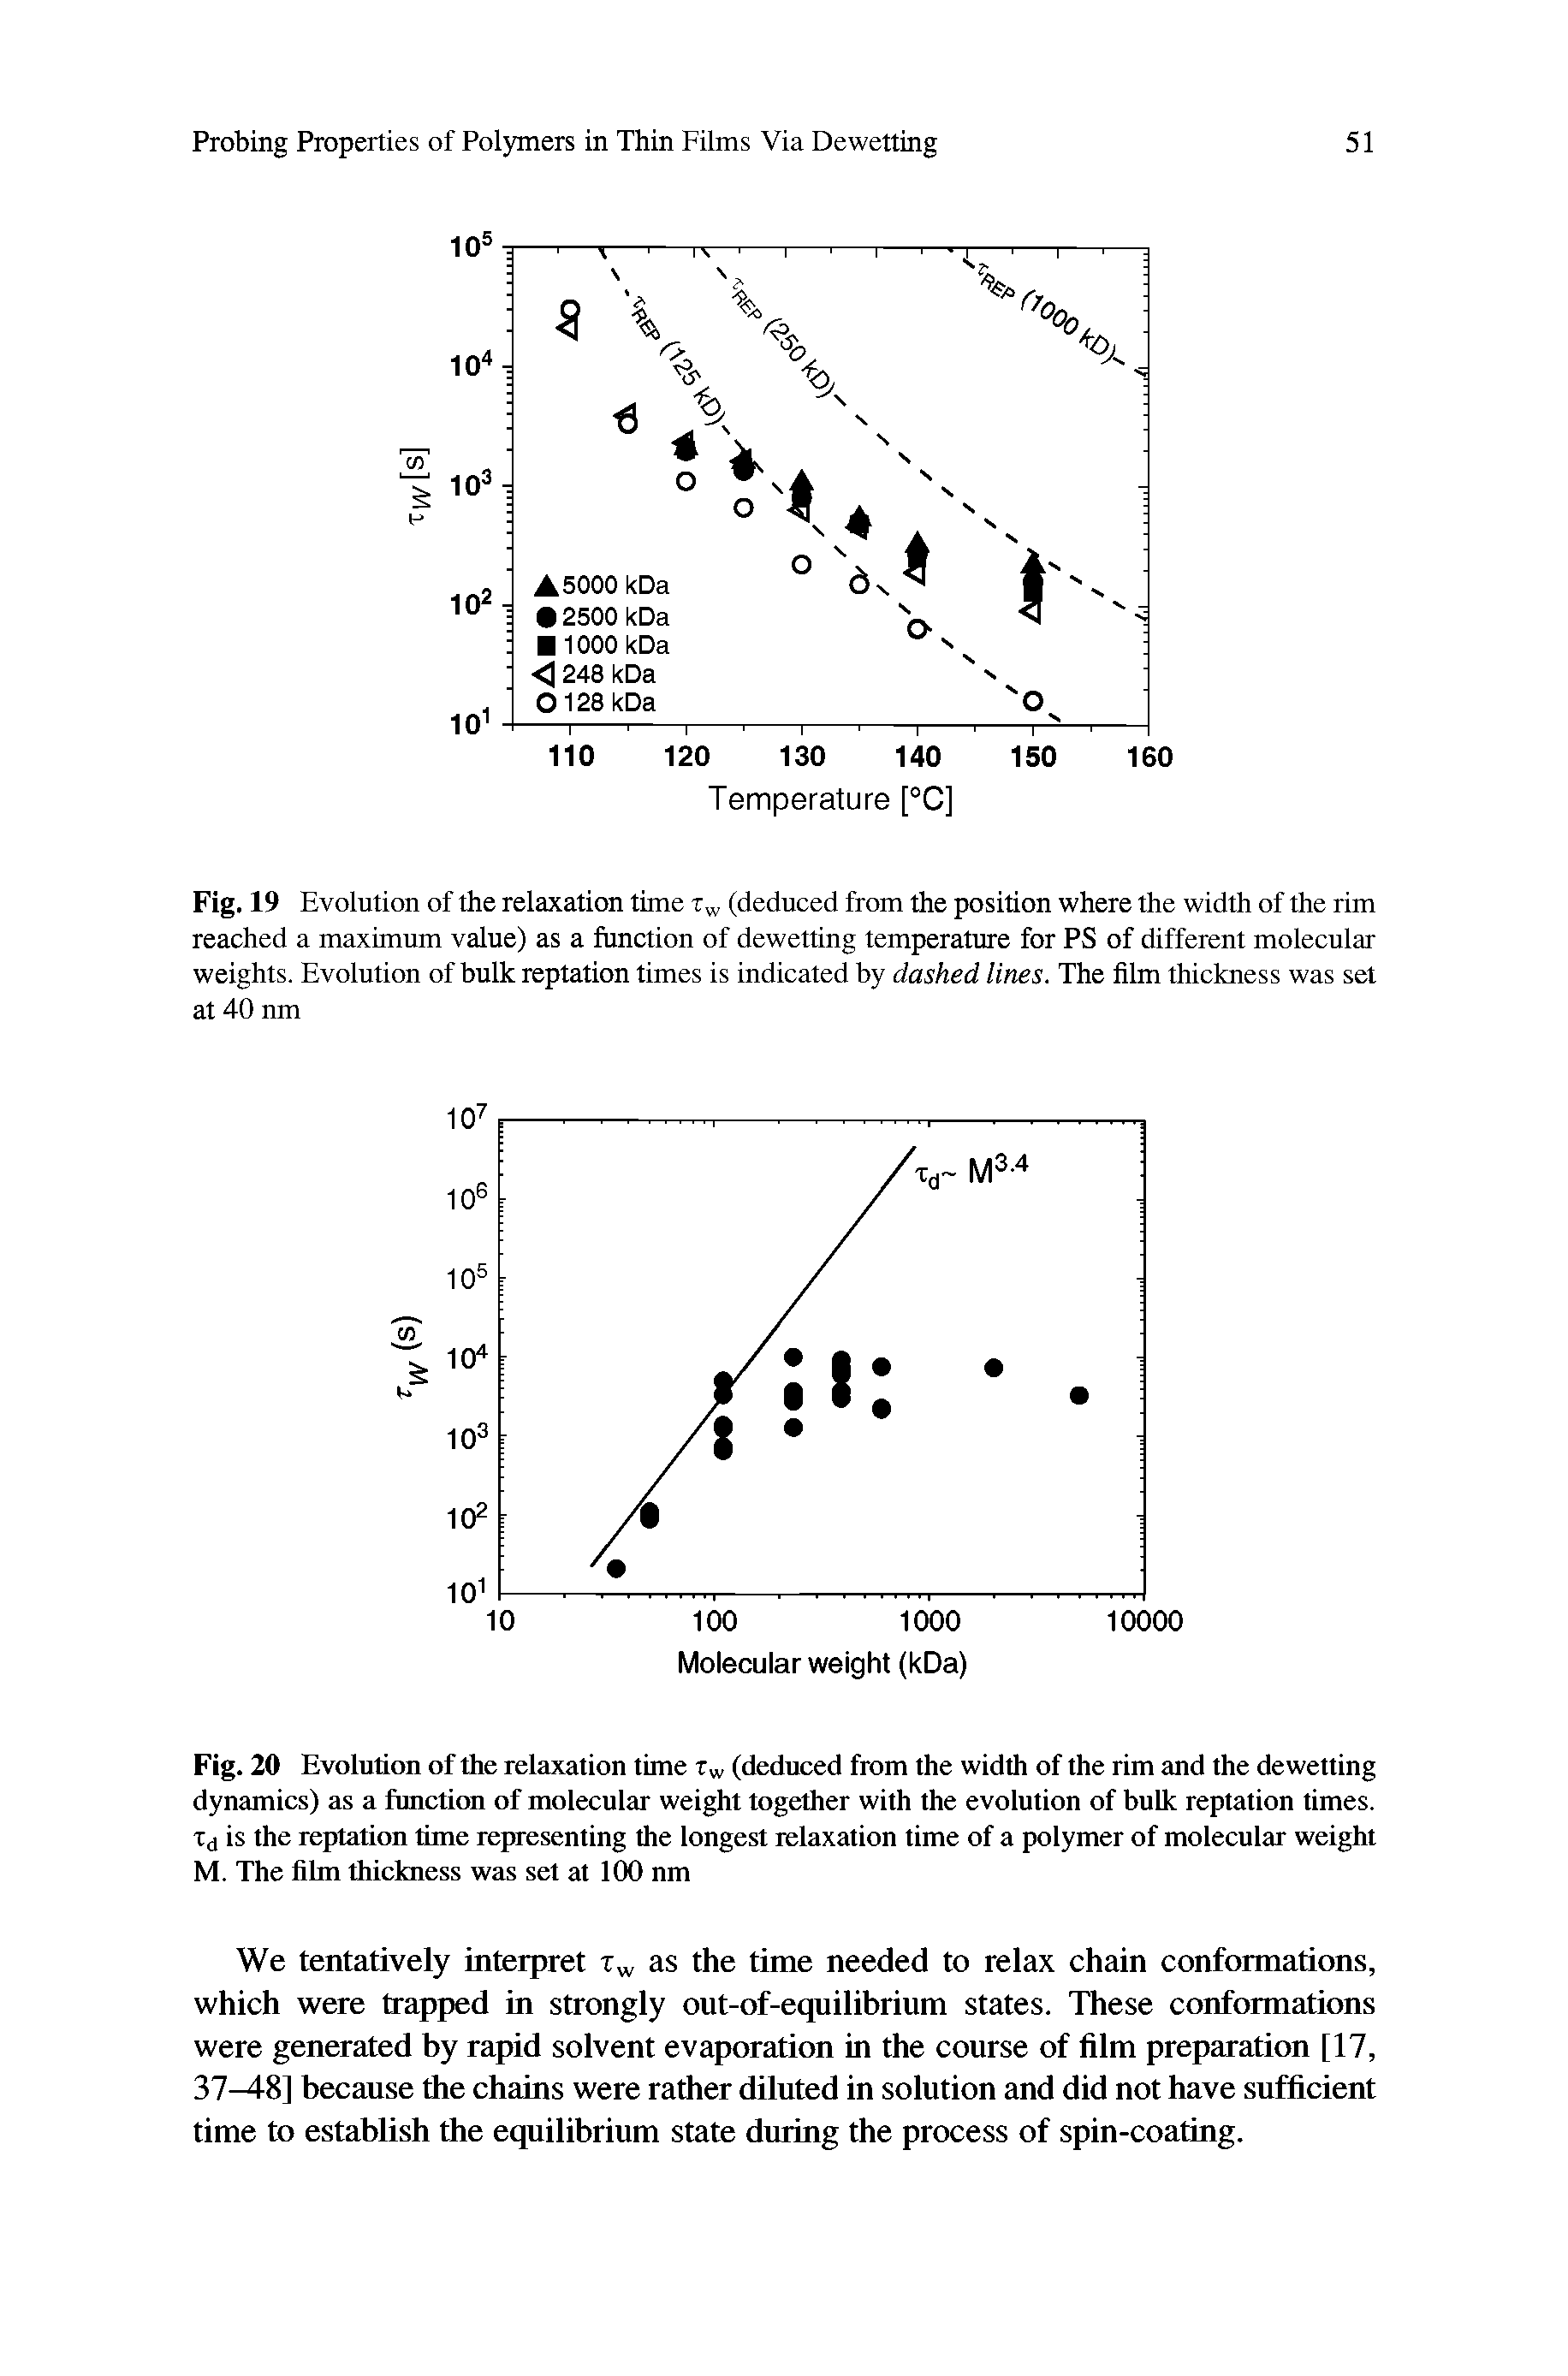 Fig. 20 Evolution of the relaxation time r (deduced from the width of the rim and the de wetting dynamics) as a function of molecular weight together with the evolution of bulk reptation times. Xd is the reptation time representing the longest relaxation time of a polymer of molecular weight M. The film thickness was set at 100 nm...